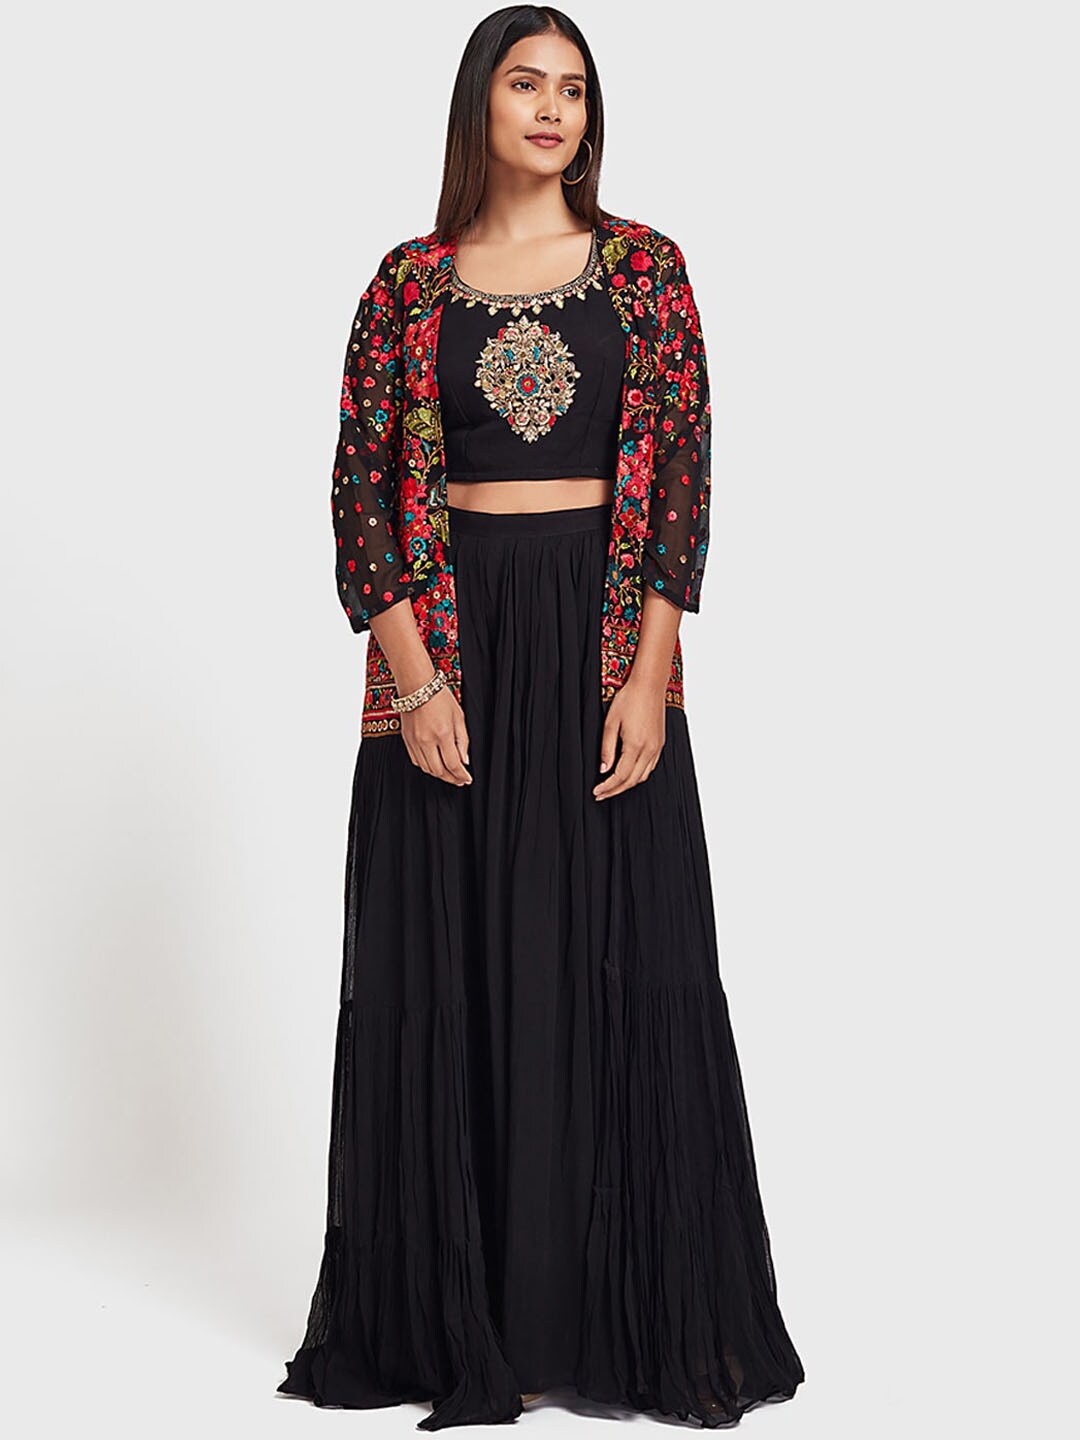 Neerus Women Black & Red Embellished Top with Skirt Price in India